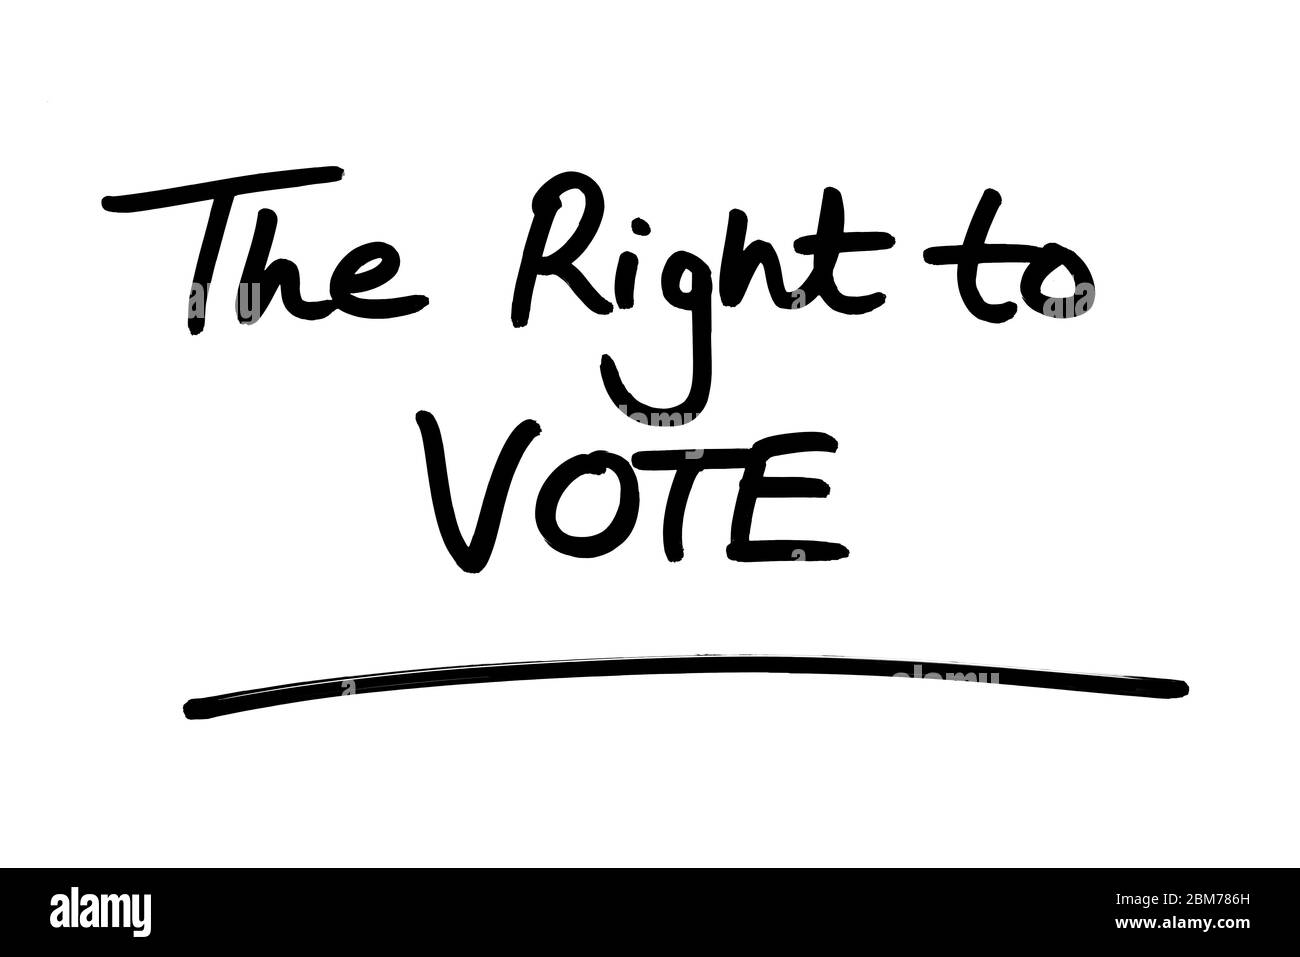 The Right to VOTE handwritten on a white background. Stock Photo